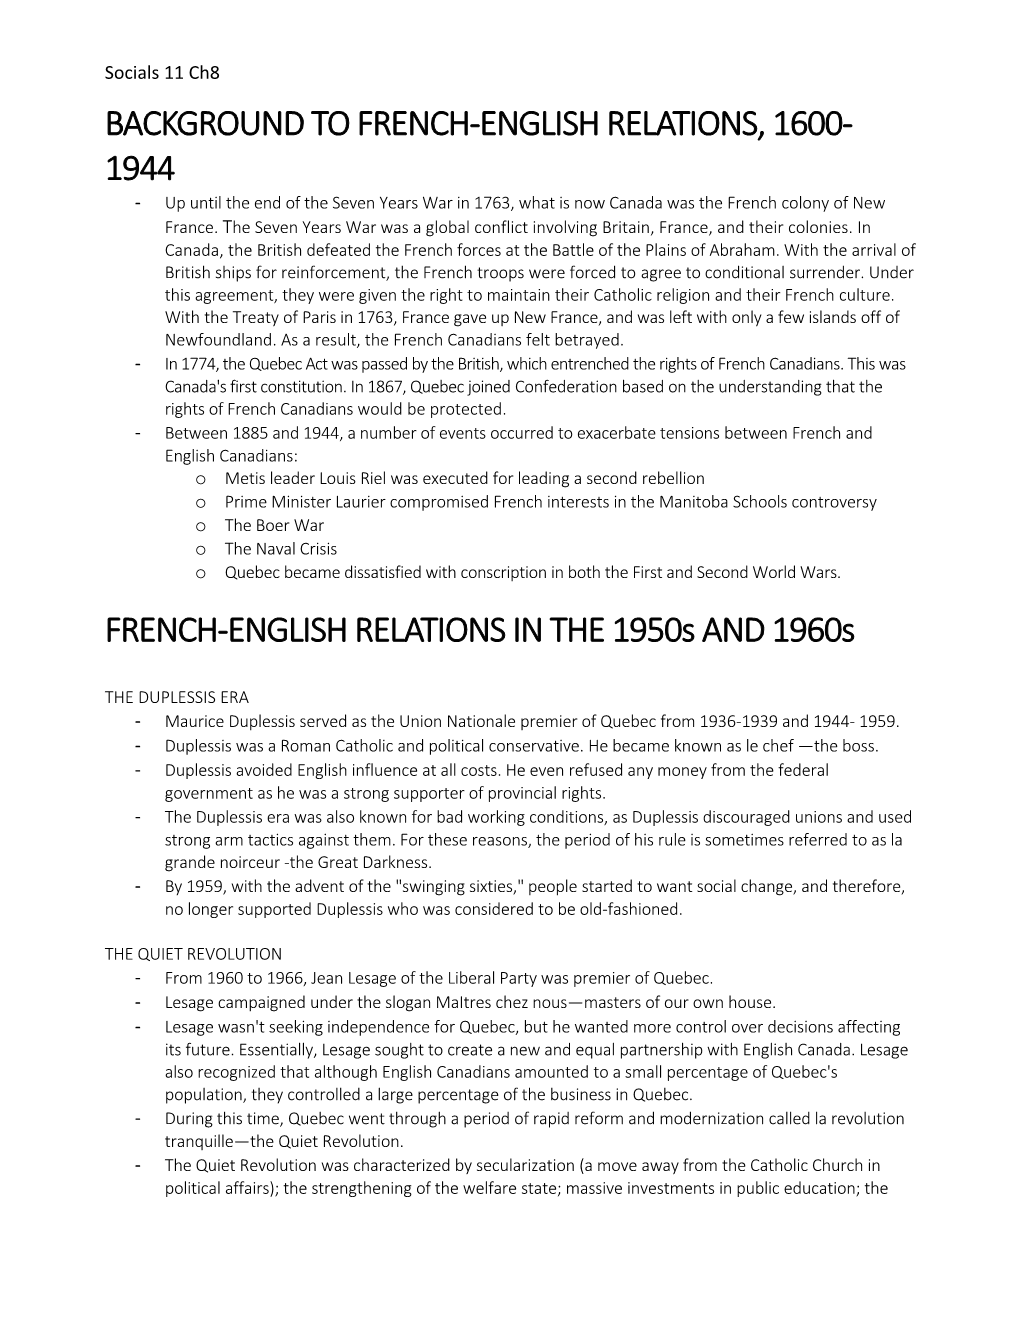 Background to French-English Relations, 1600-1944